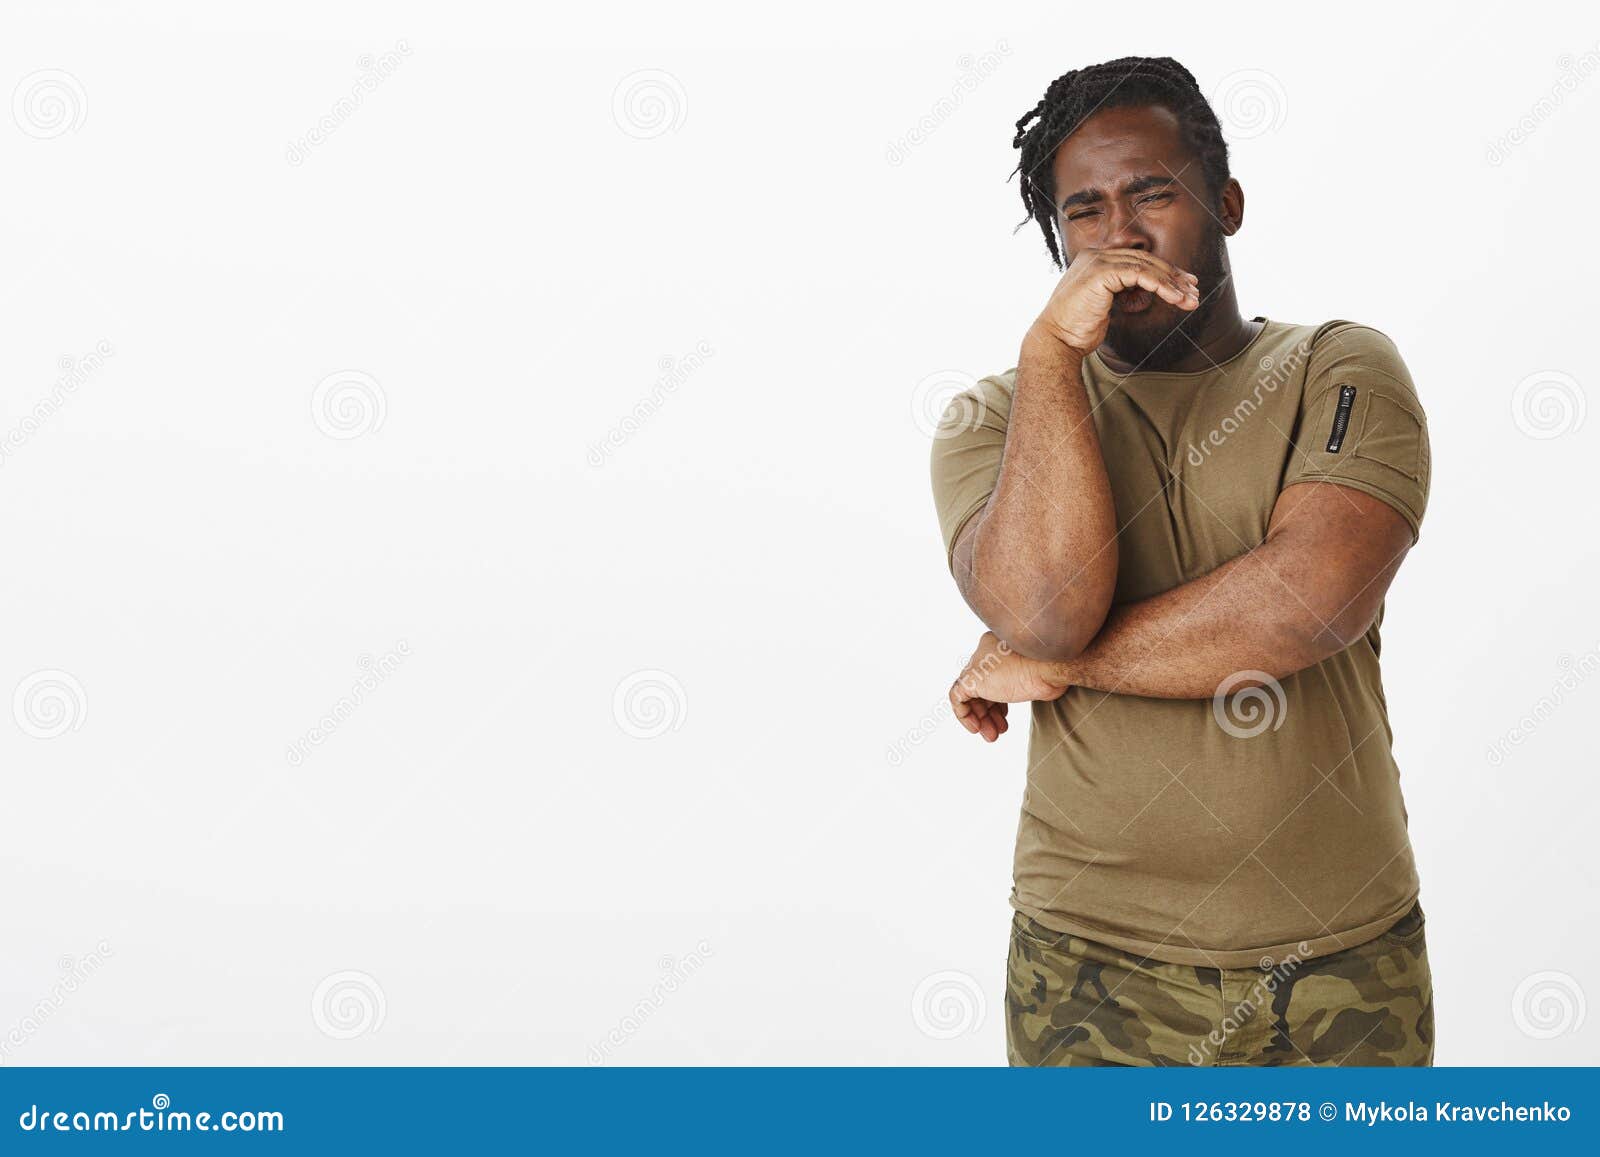 disgusted unhappy dark-skinned man in military outfit, covering nose with palm from reek or awful smell, expressing